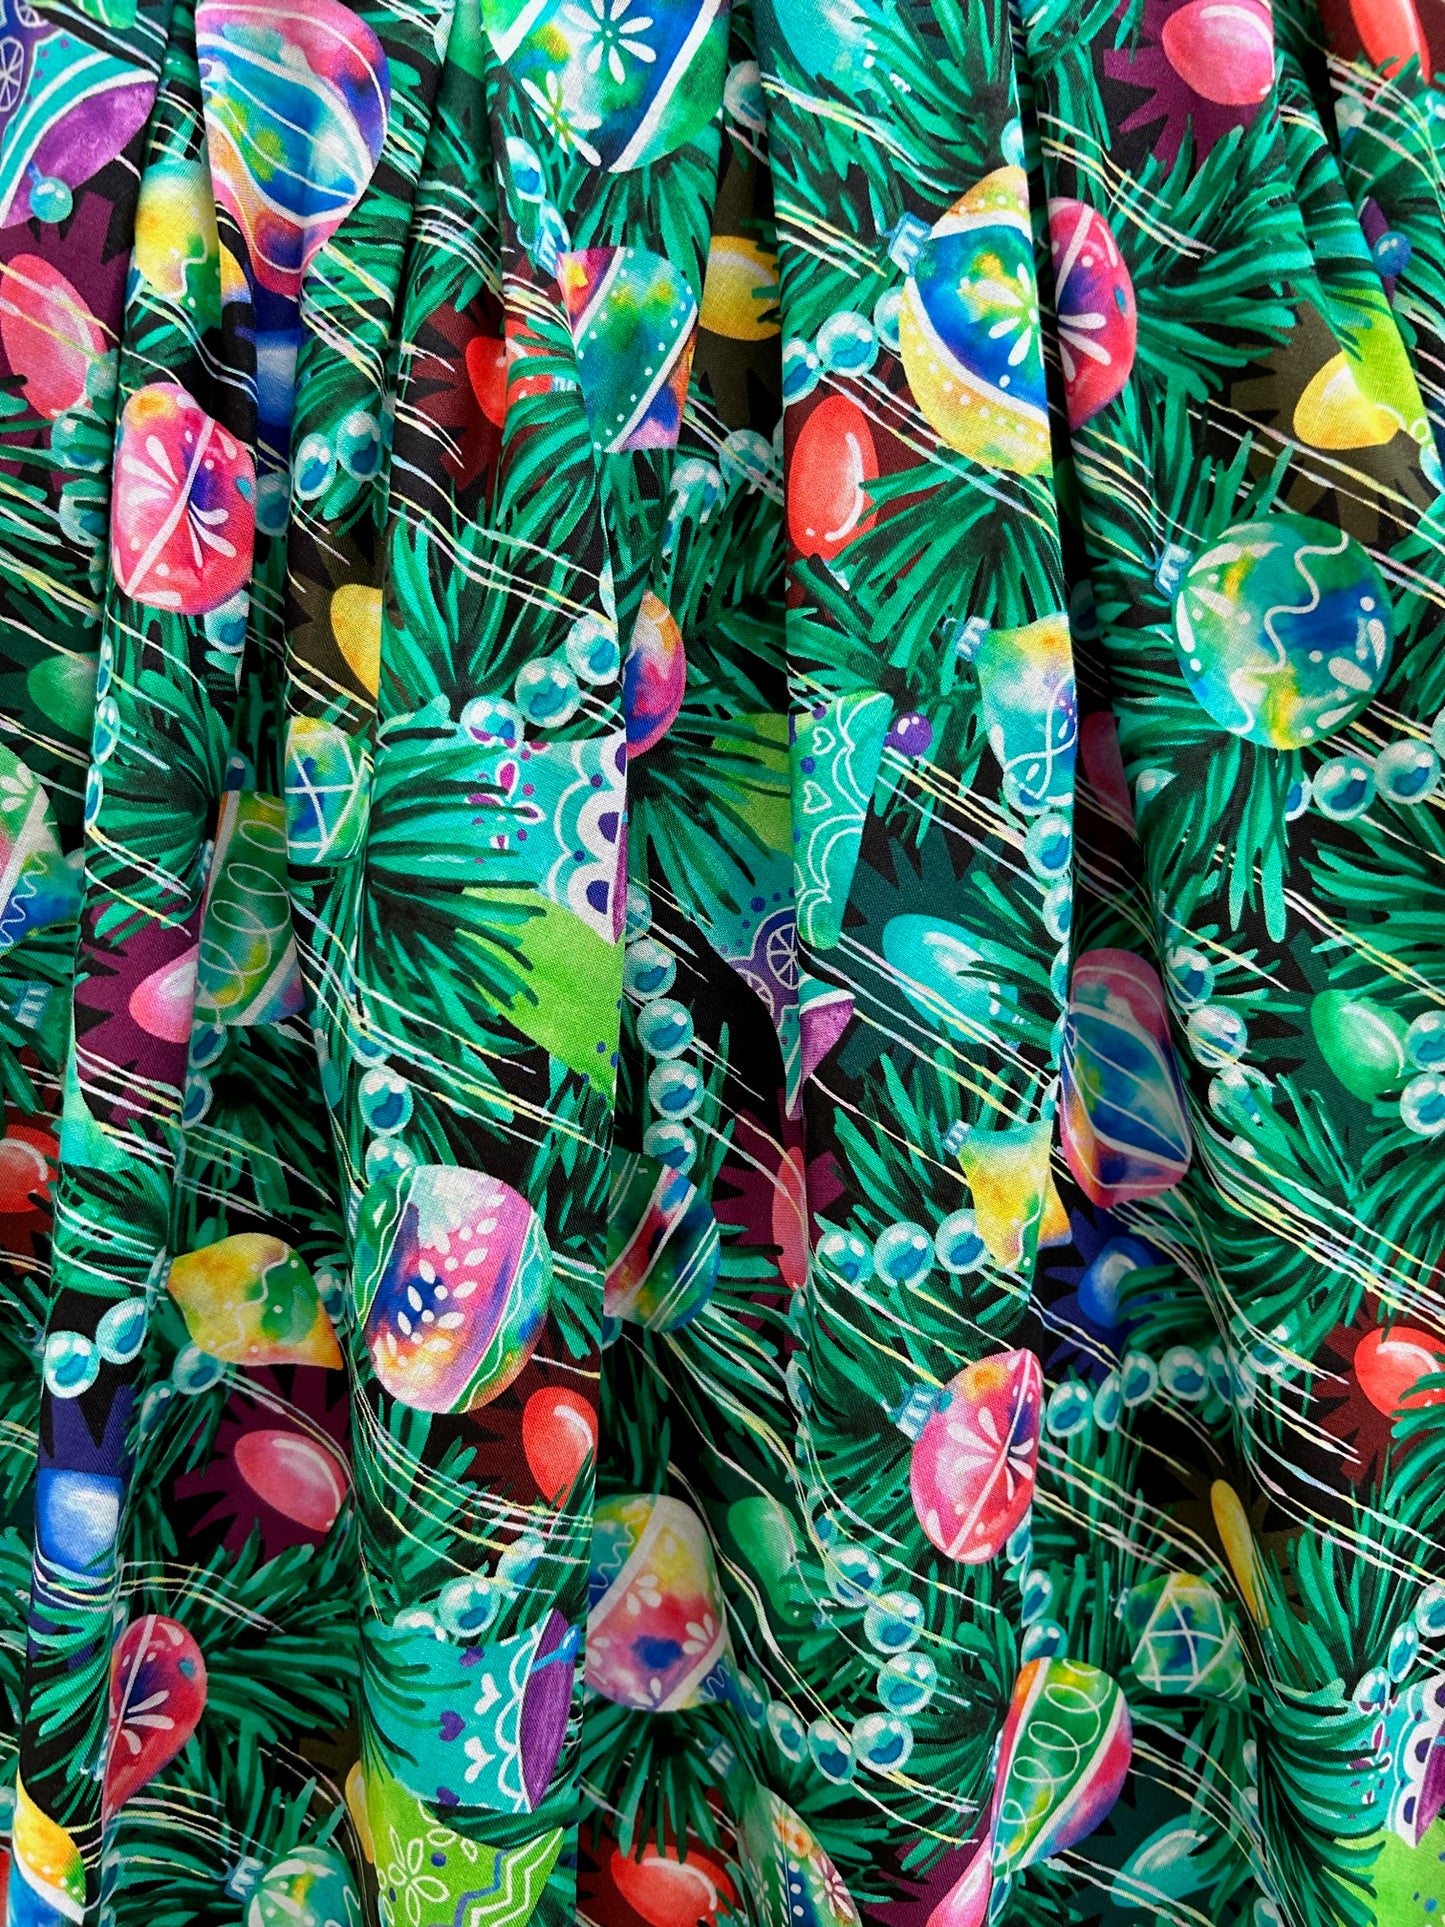 close up showing the colorful ornaments on a geen background